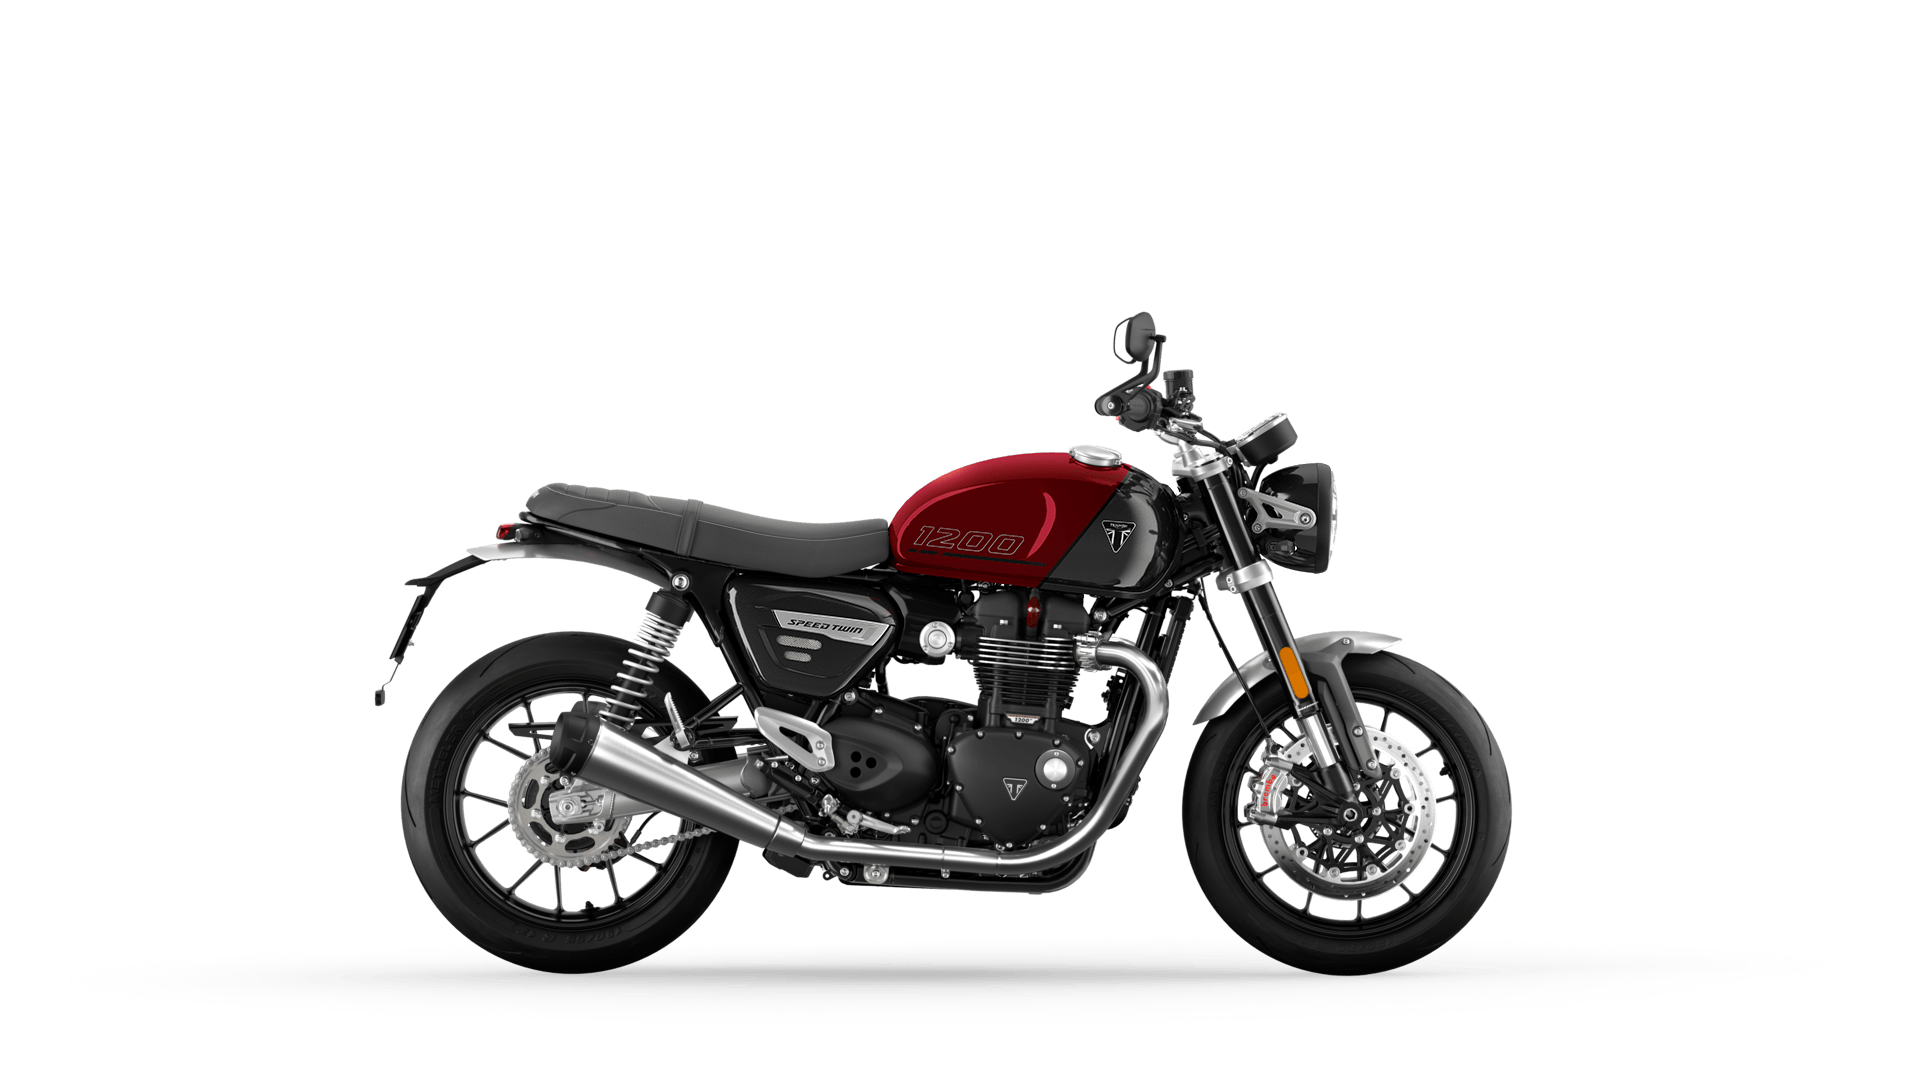 Speed Twin 1200 | For the Ride